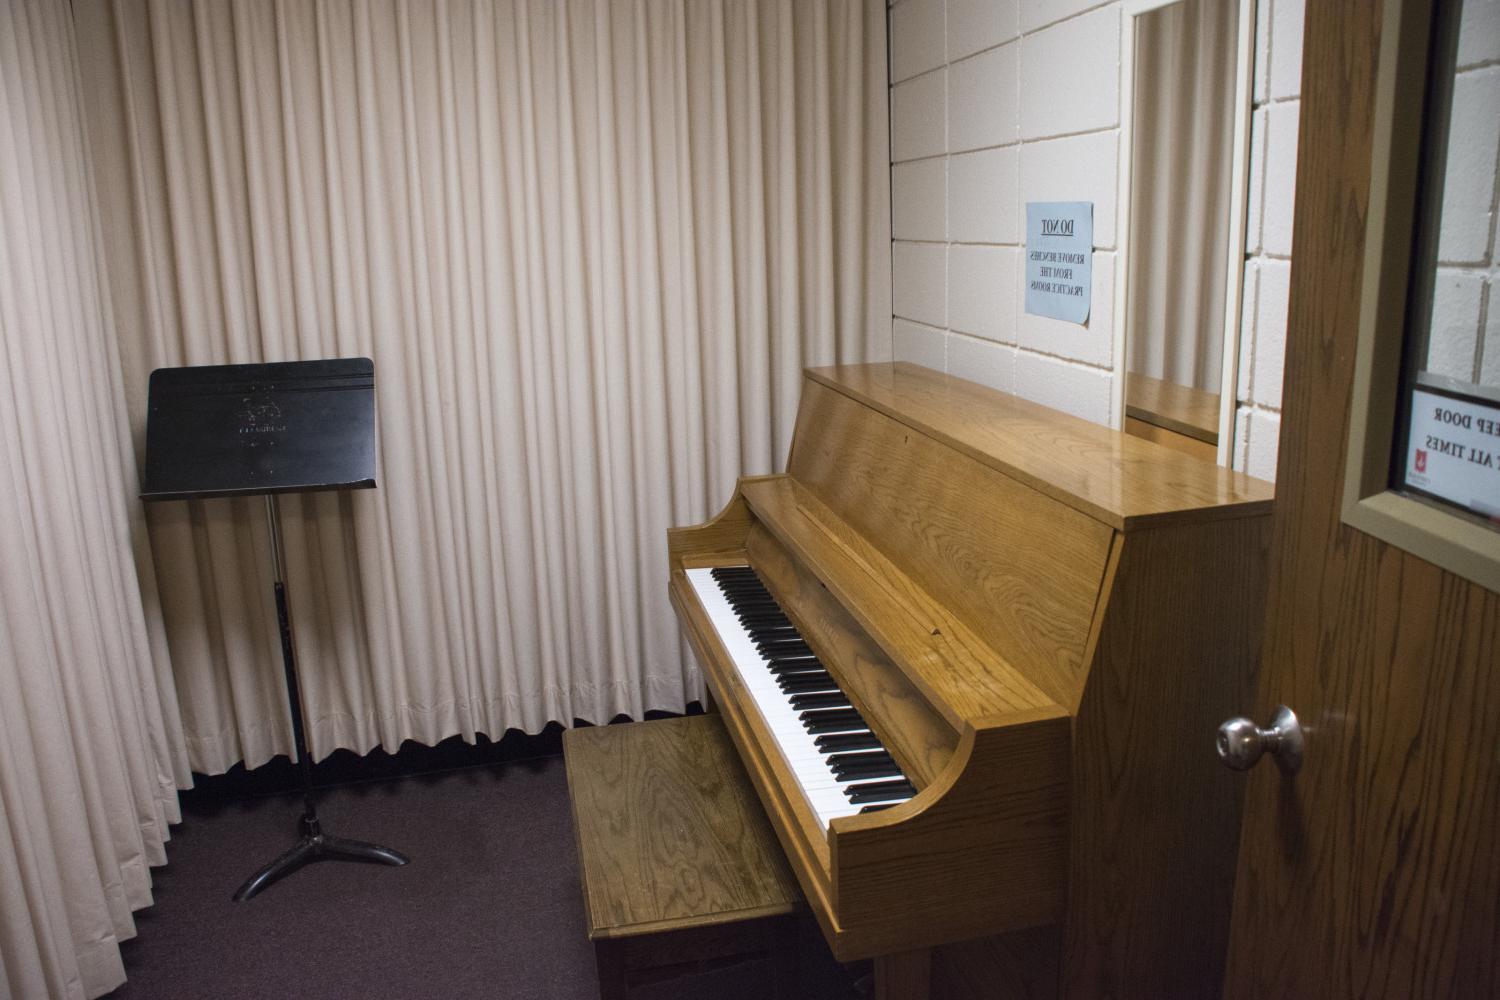 One of the Practice Rooms in the H. F. Johnson Center for the Arts.